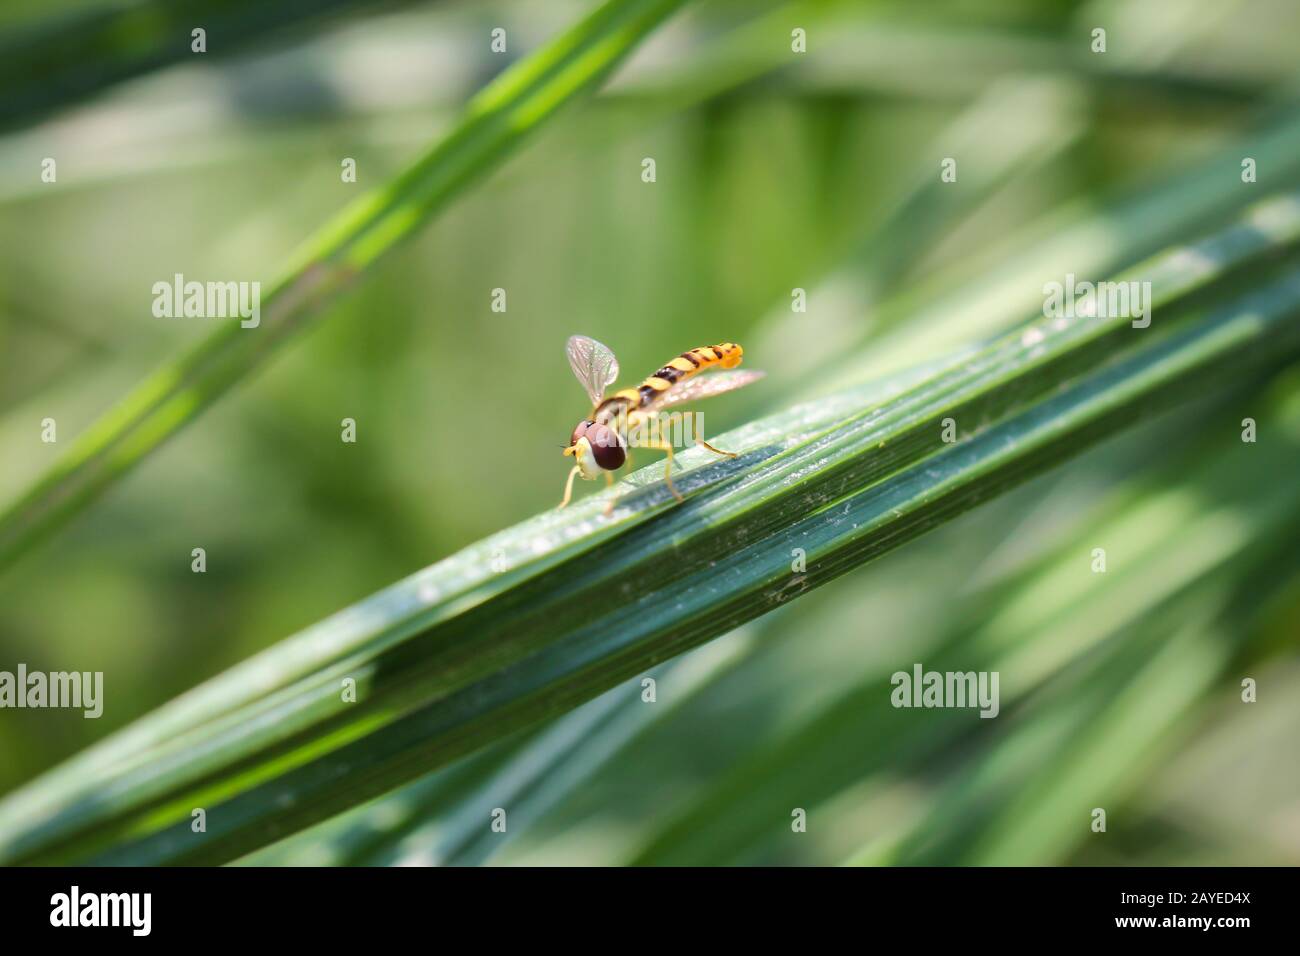 a hoverfly has settled on a blade of grass Stock Photo